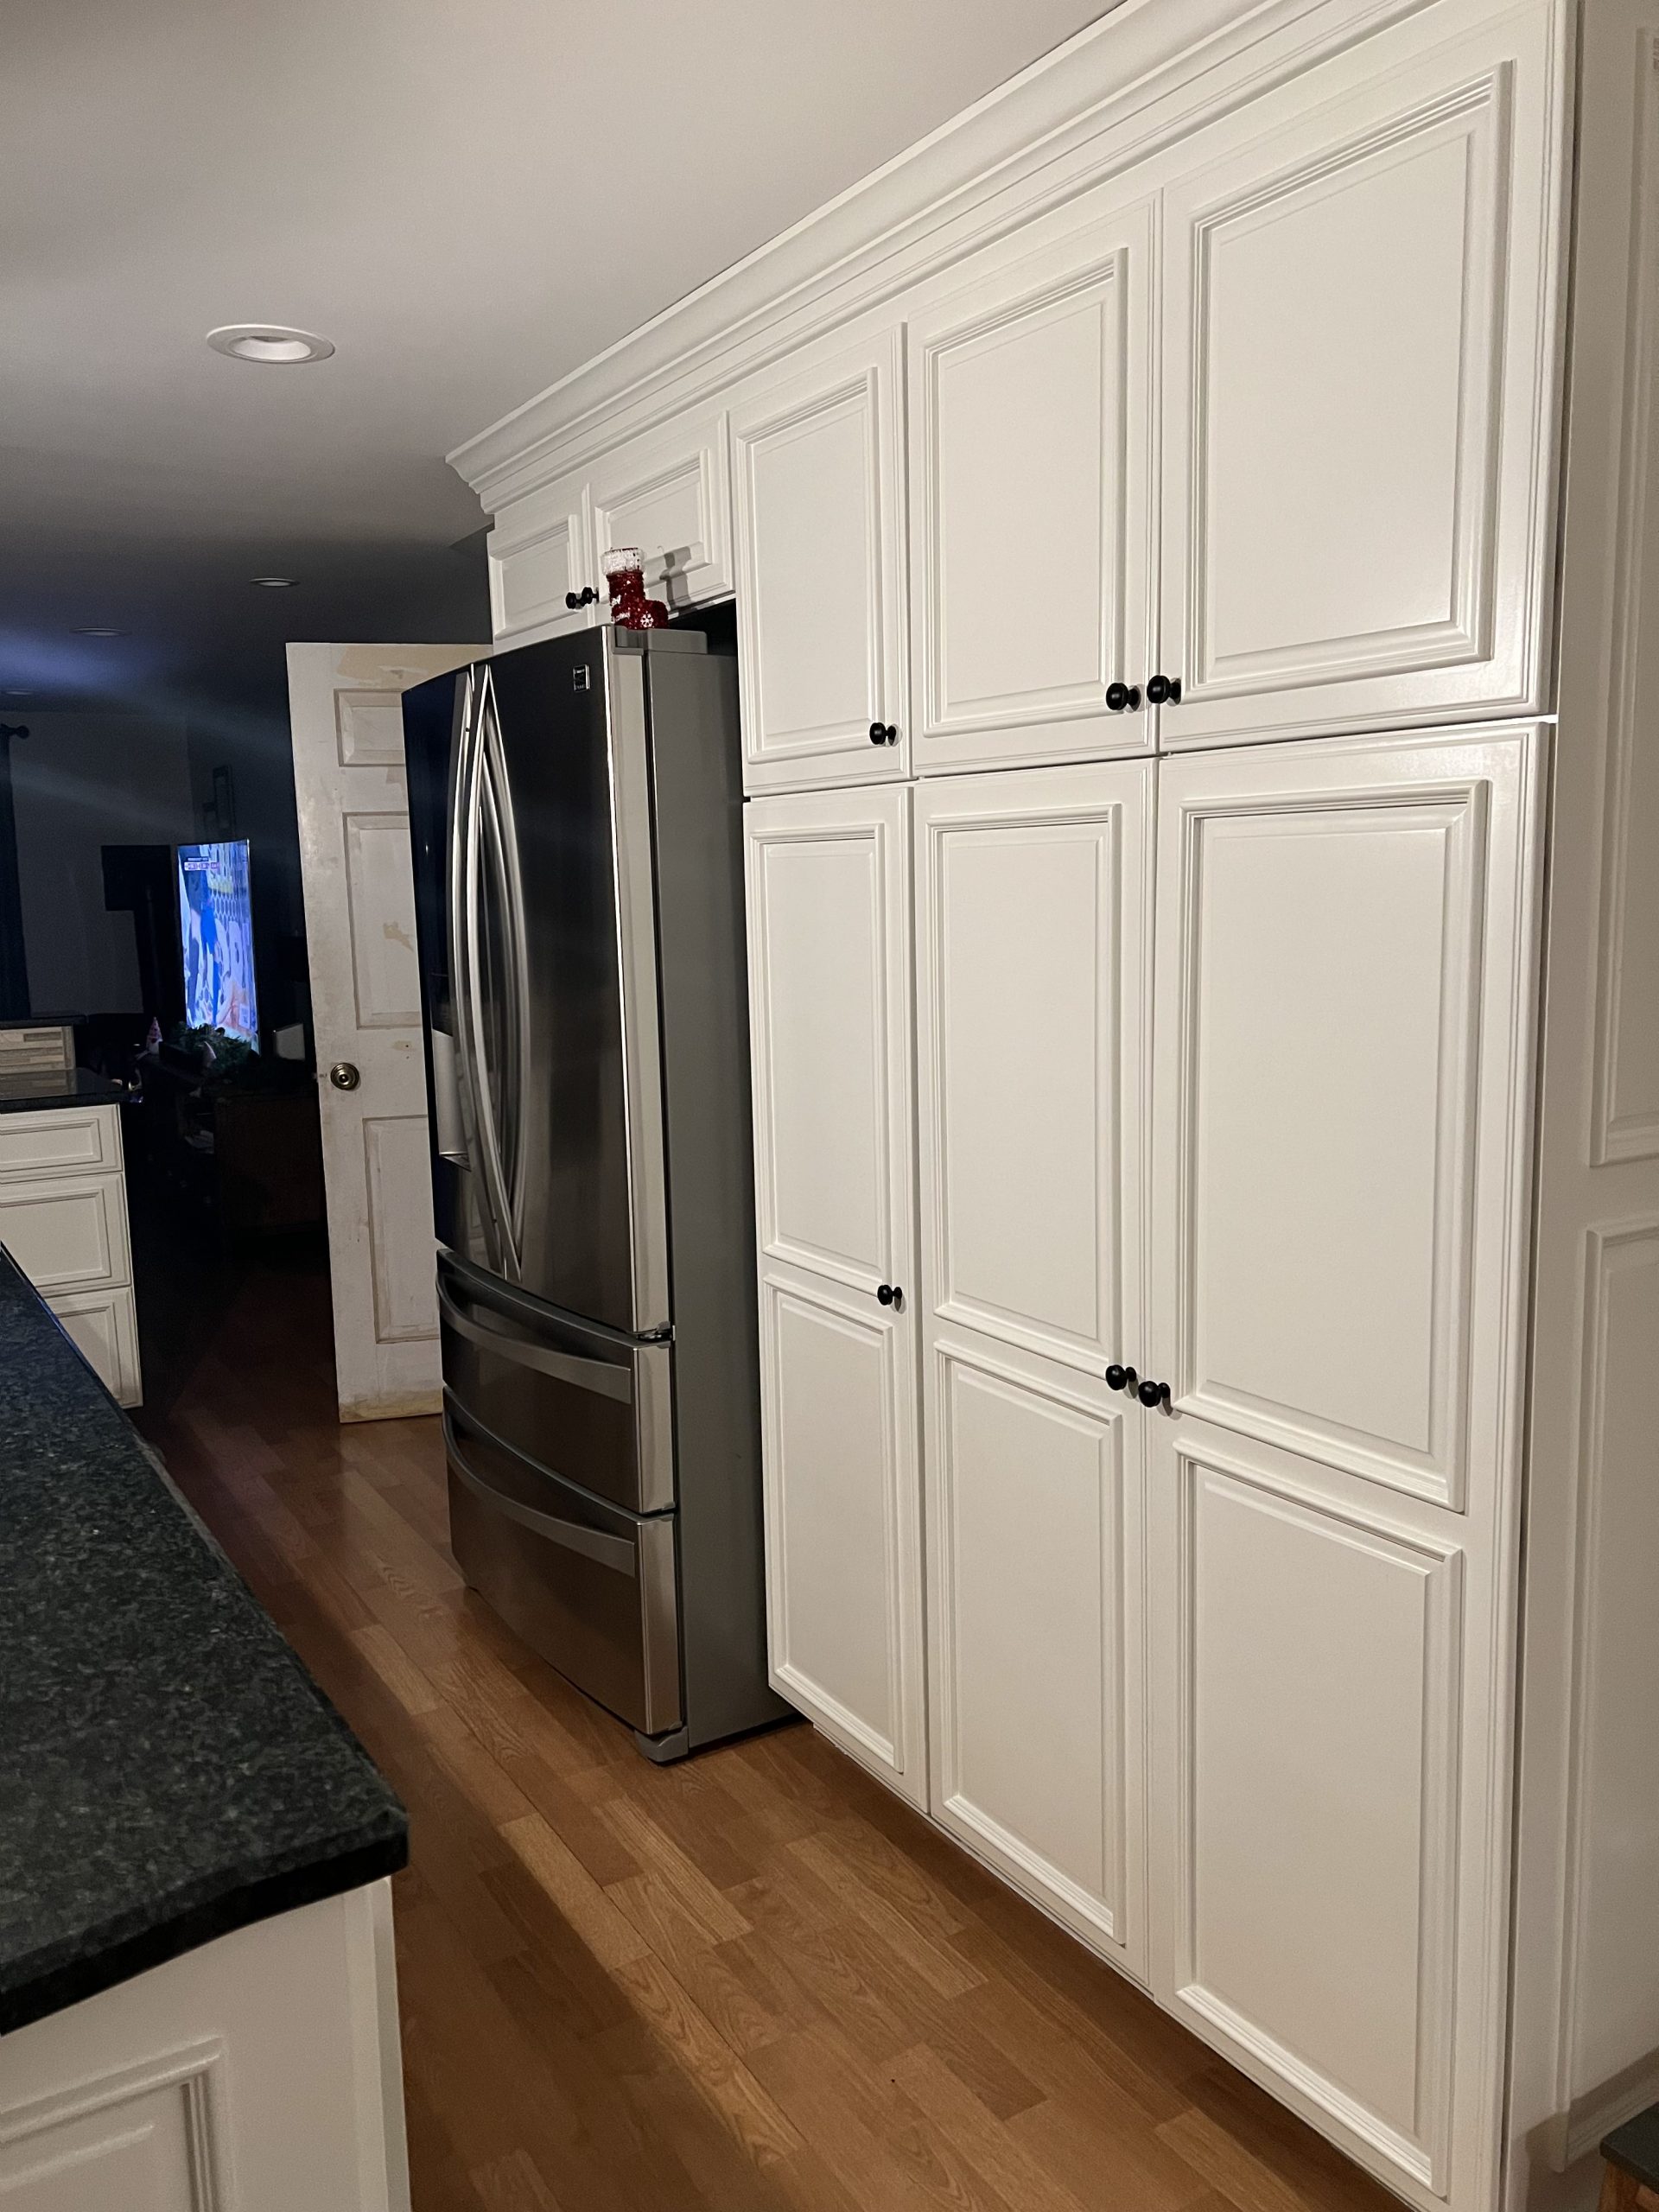 cabinets after